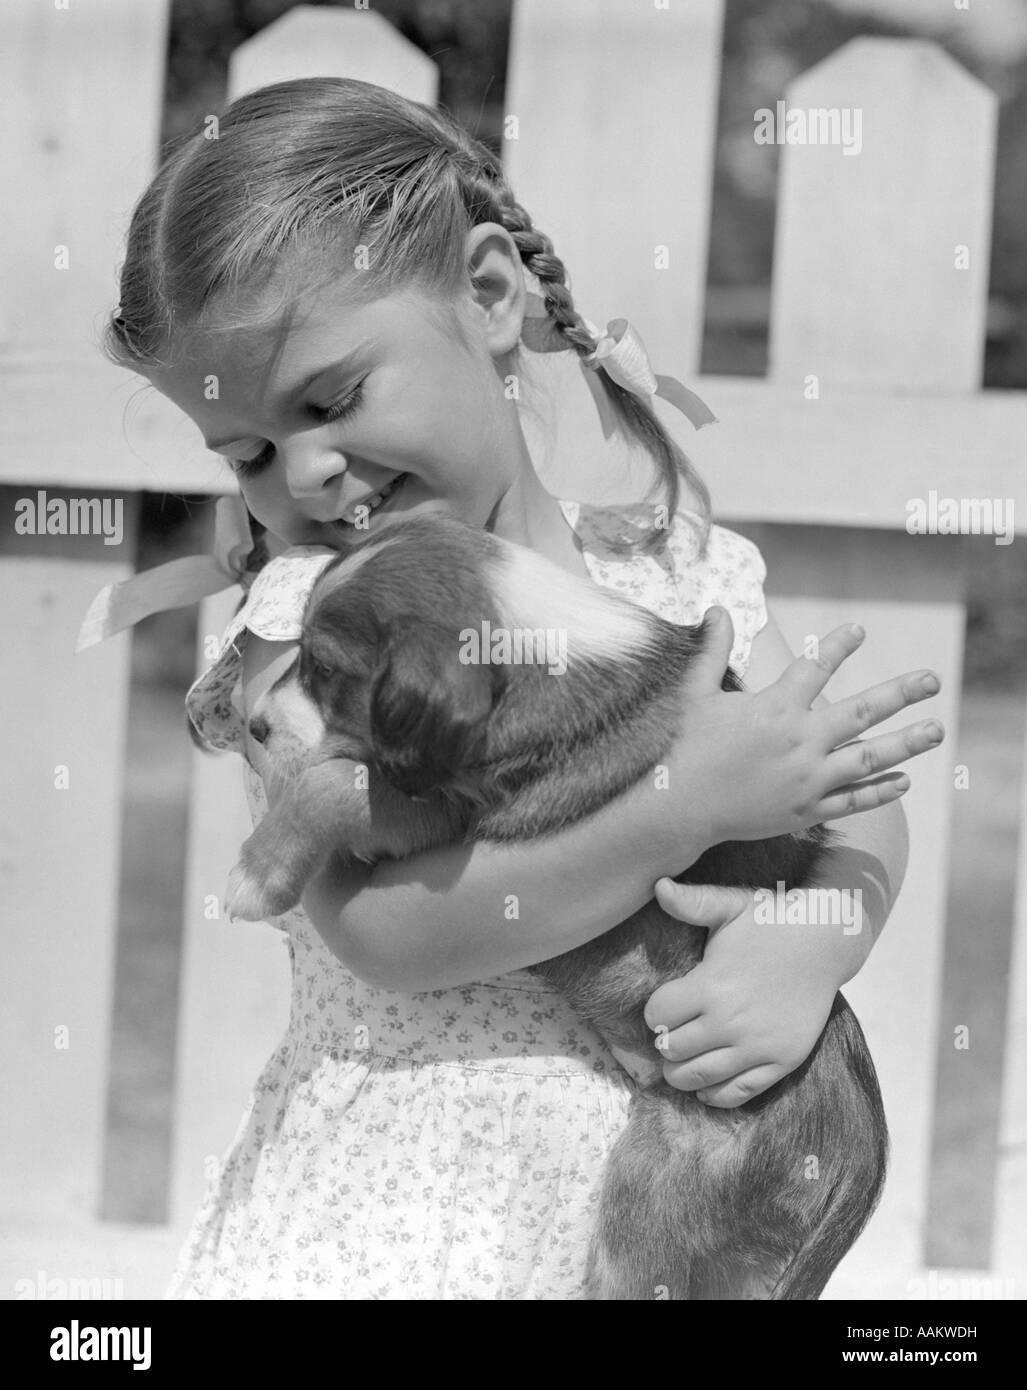 1930s 1940s 1950s LITTLE GIRL WITH BRAIDS HOLDING A NEW PUPPY DOG Stock Photo